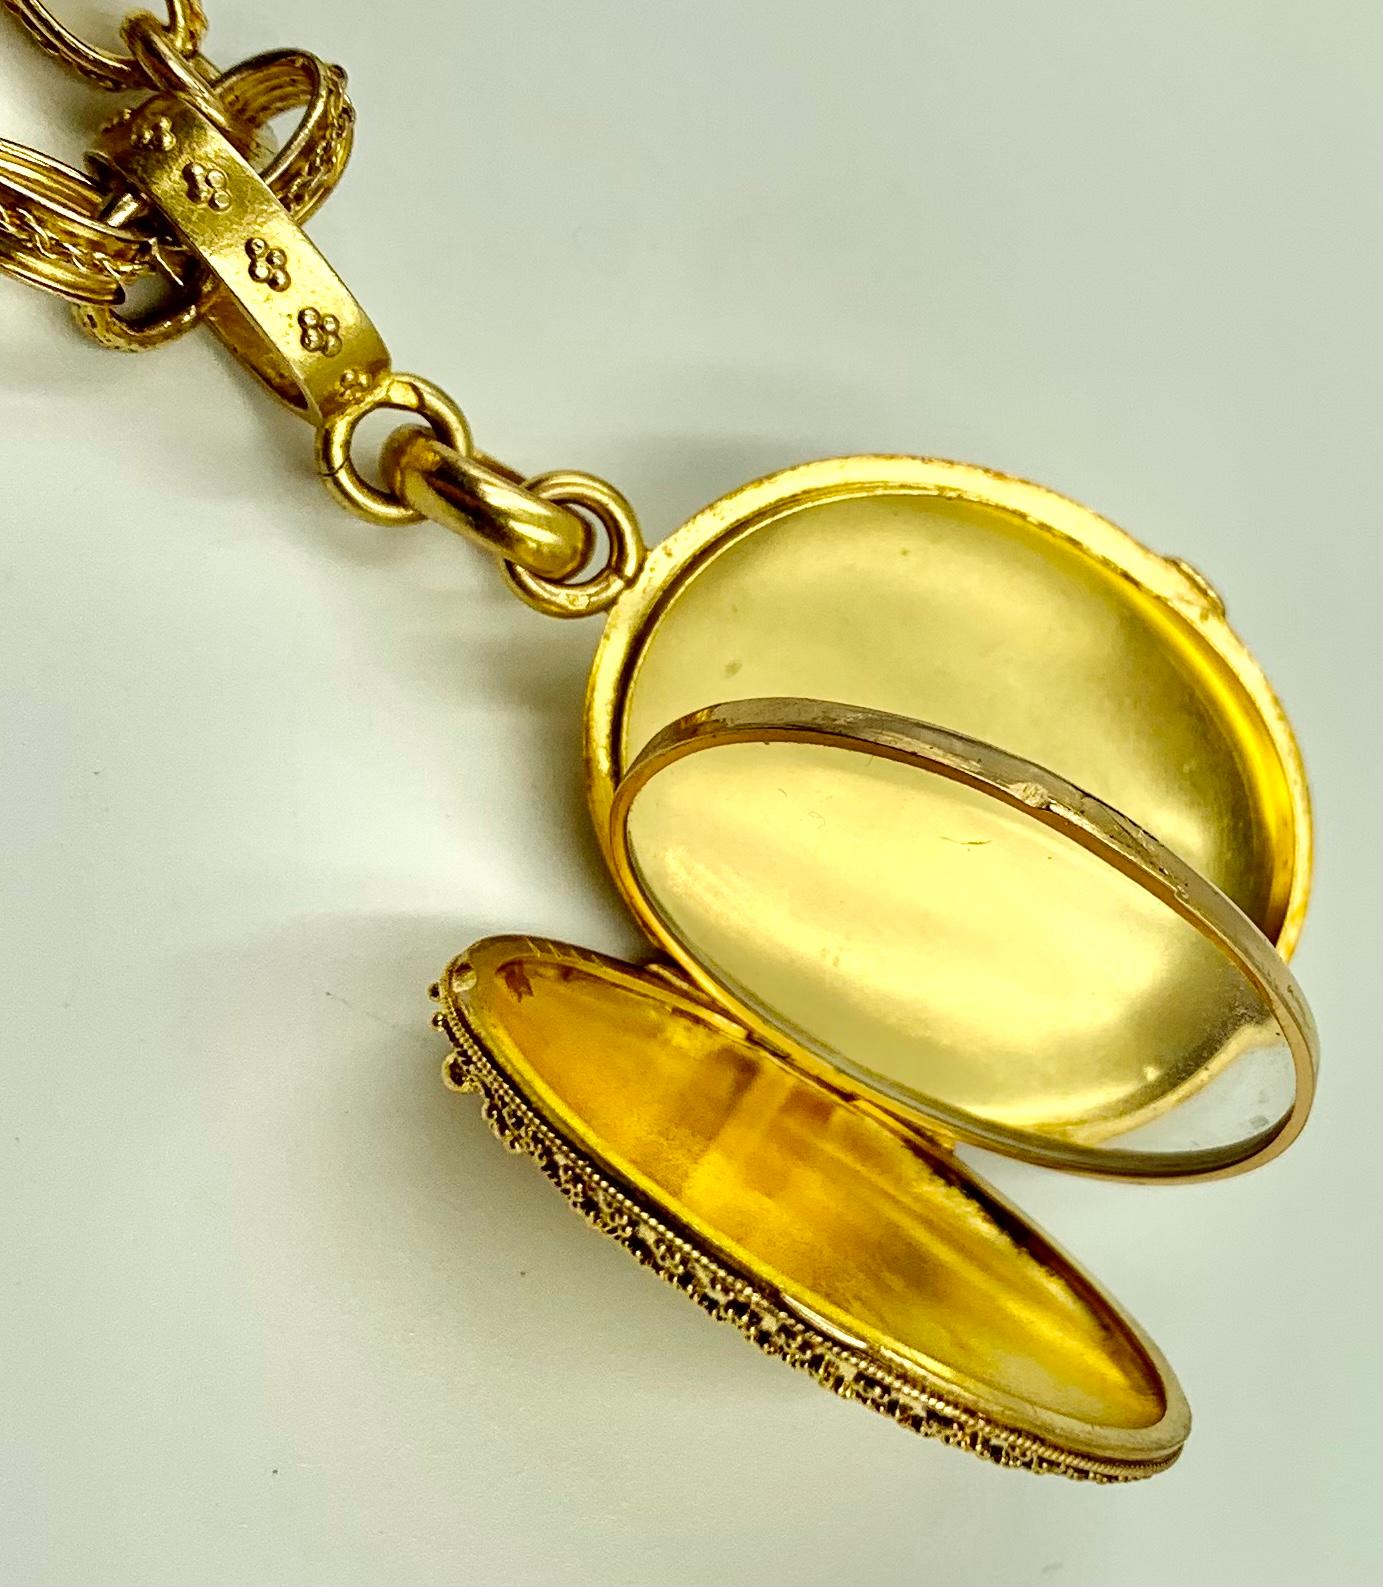 ﻿Large, stunning granulated antique French Etruscan Revival locket with the original, equally spectacular large chain. The oval locket exquisitely decorated with a technique known as granulation, where a tiny gold bead is individually applied to a